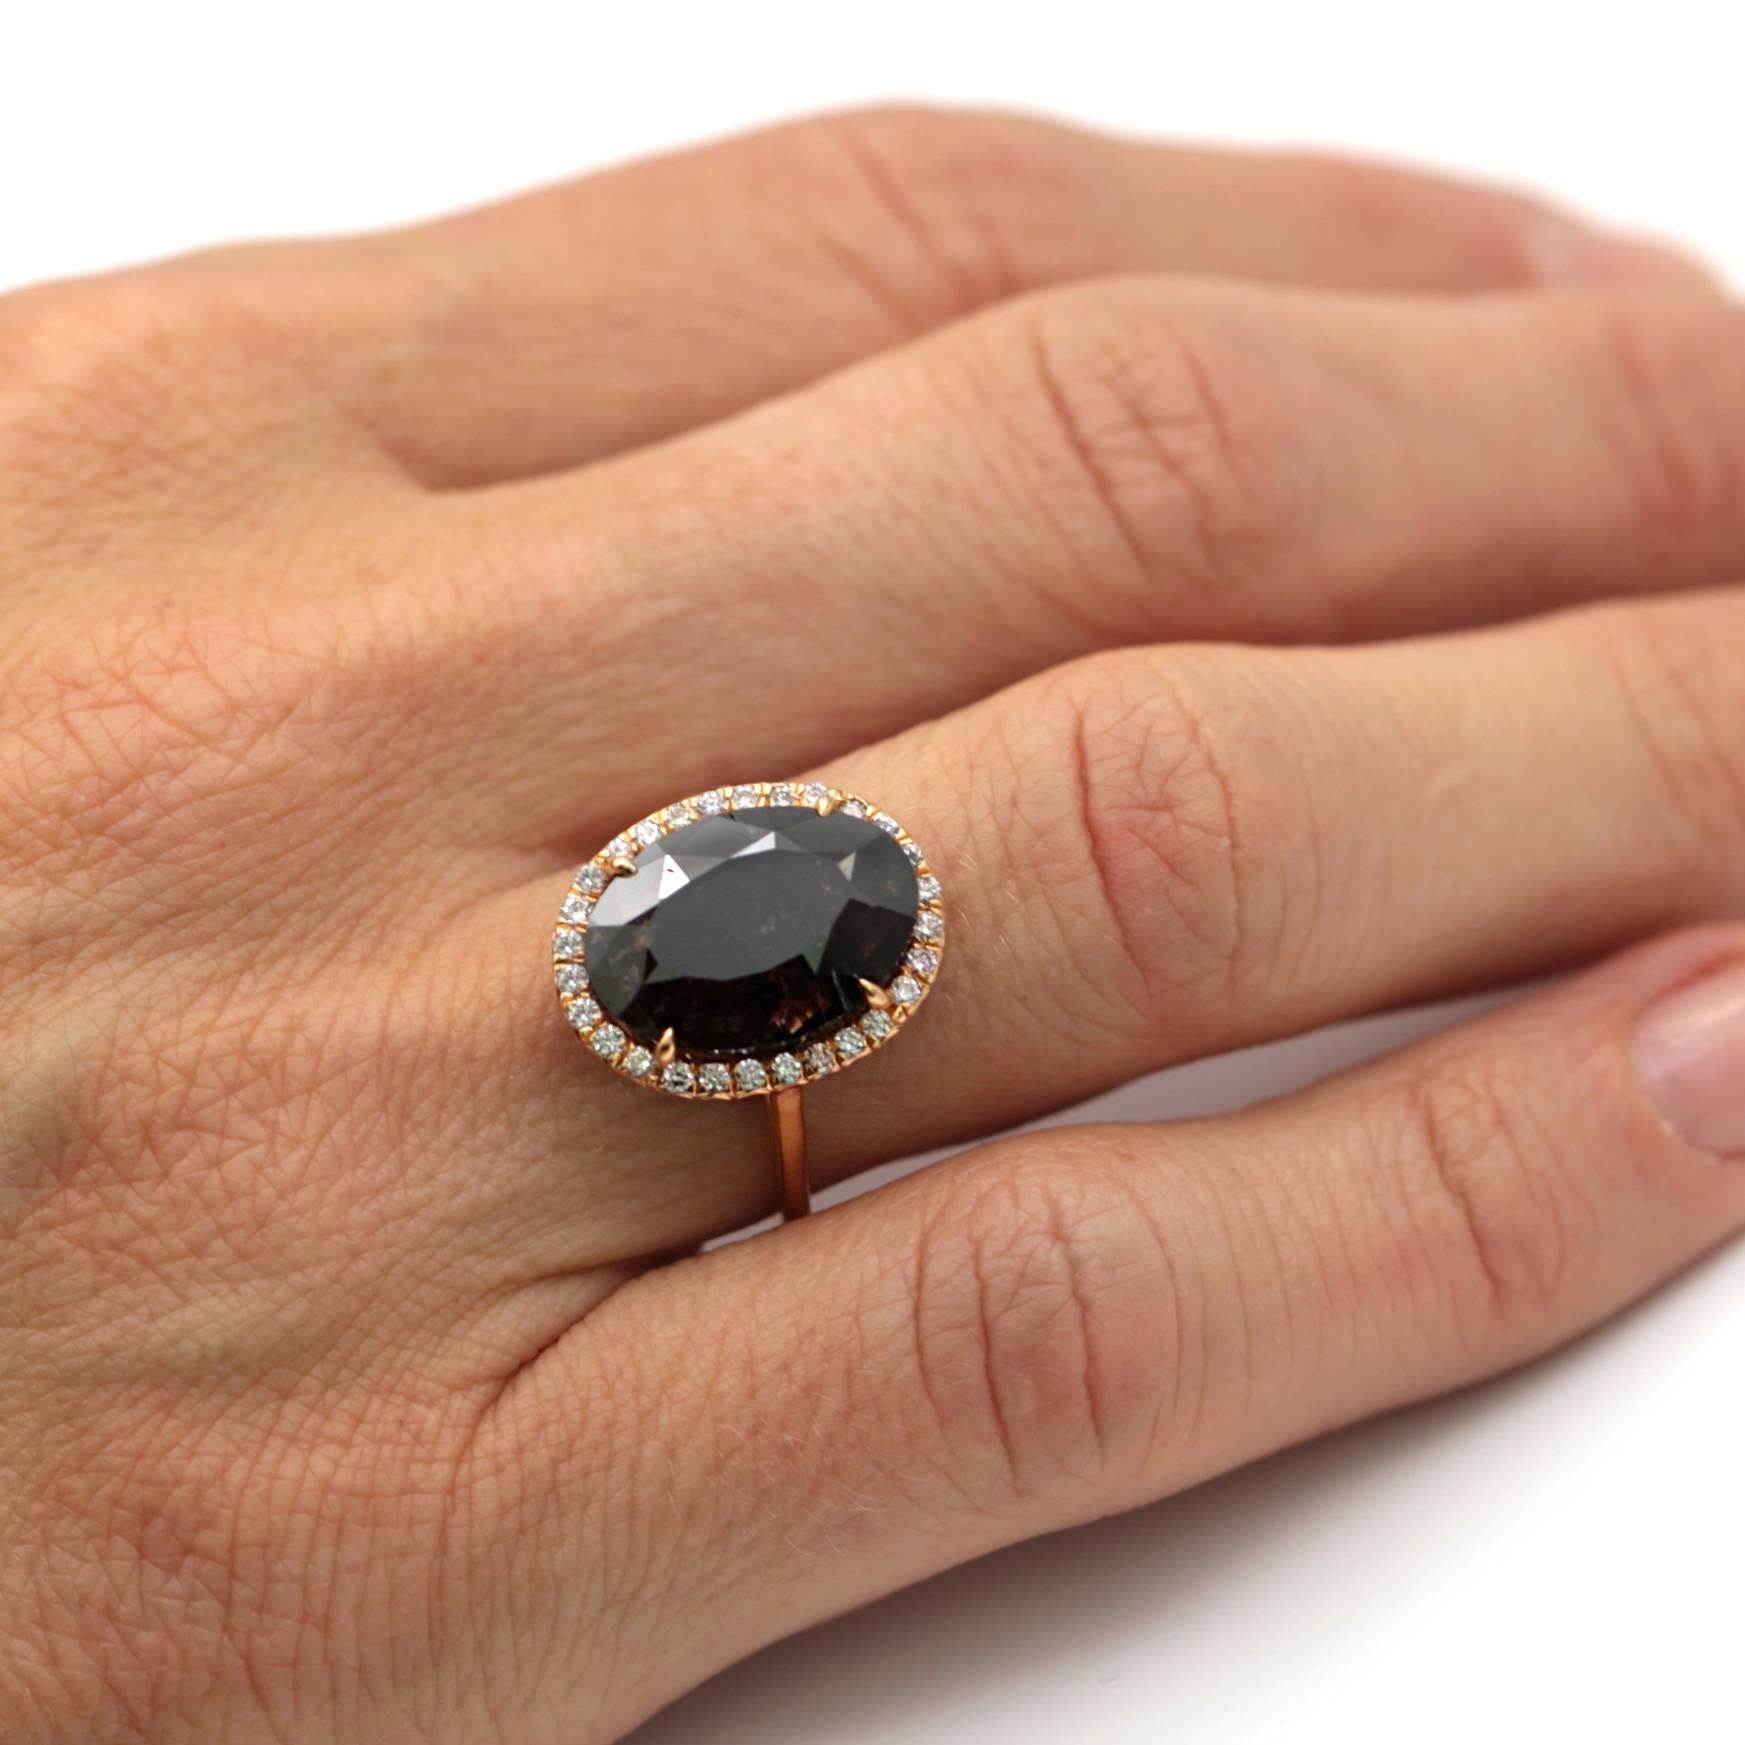 Natural black oval shaped diamond weighing 8.50 carats. The diamond is set in a 20 karat rose gold mounting with twenty-eight round light pink diamonds surrounding the center diamond. The ring is a size 6.5.